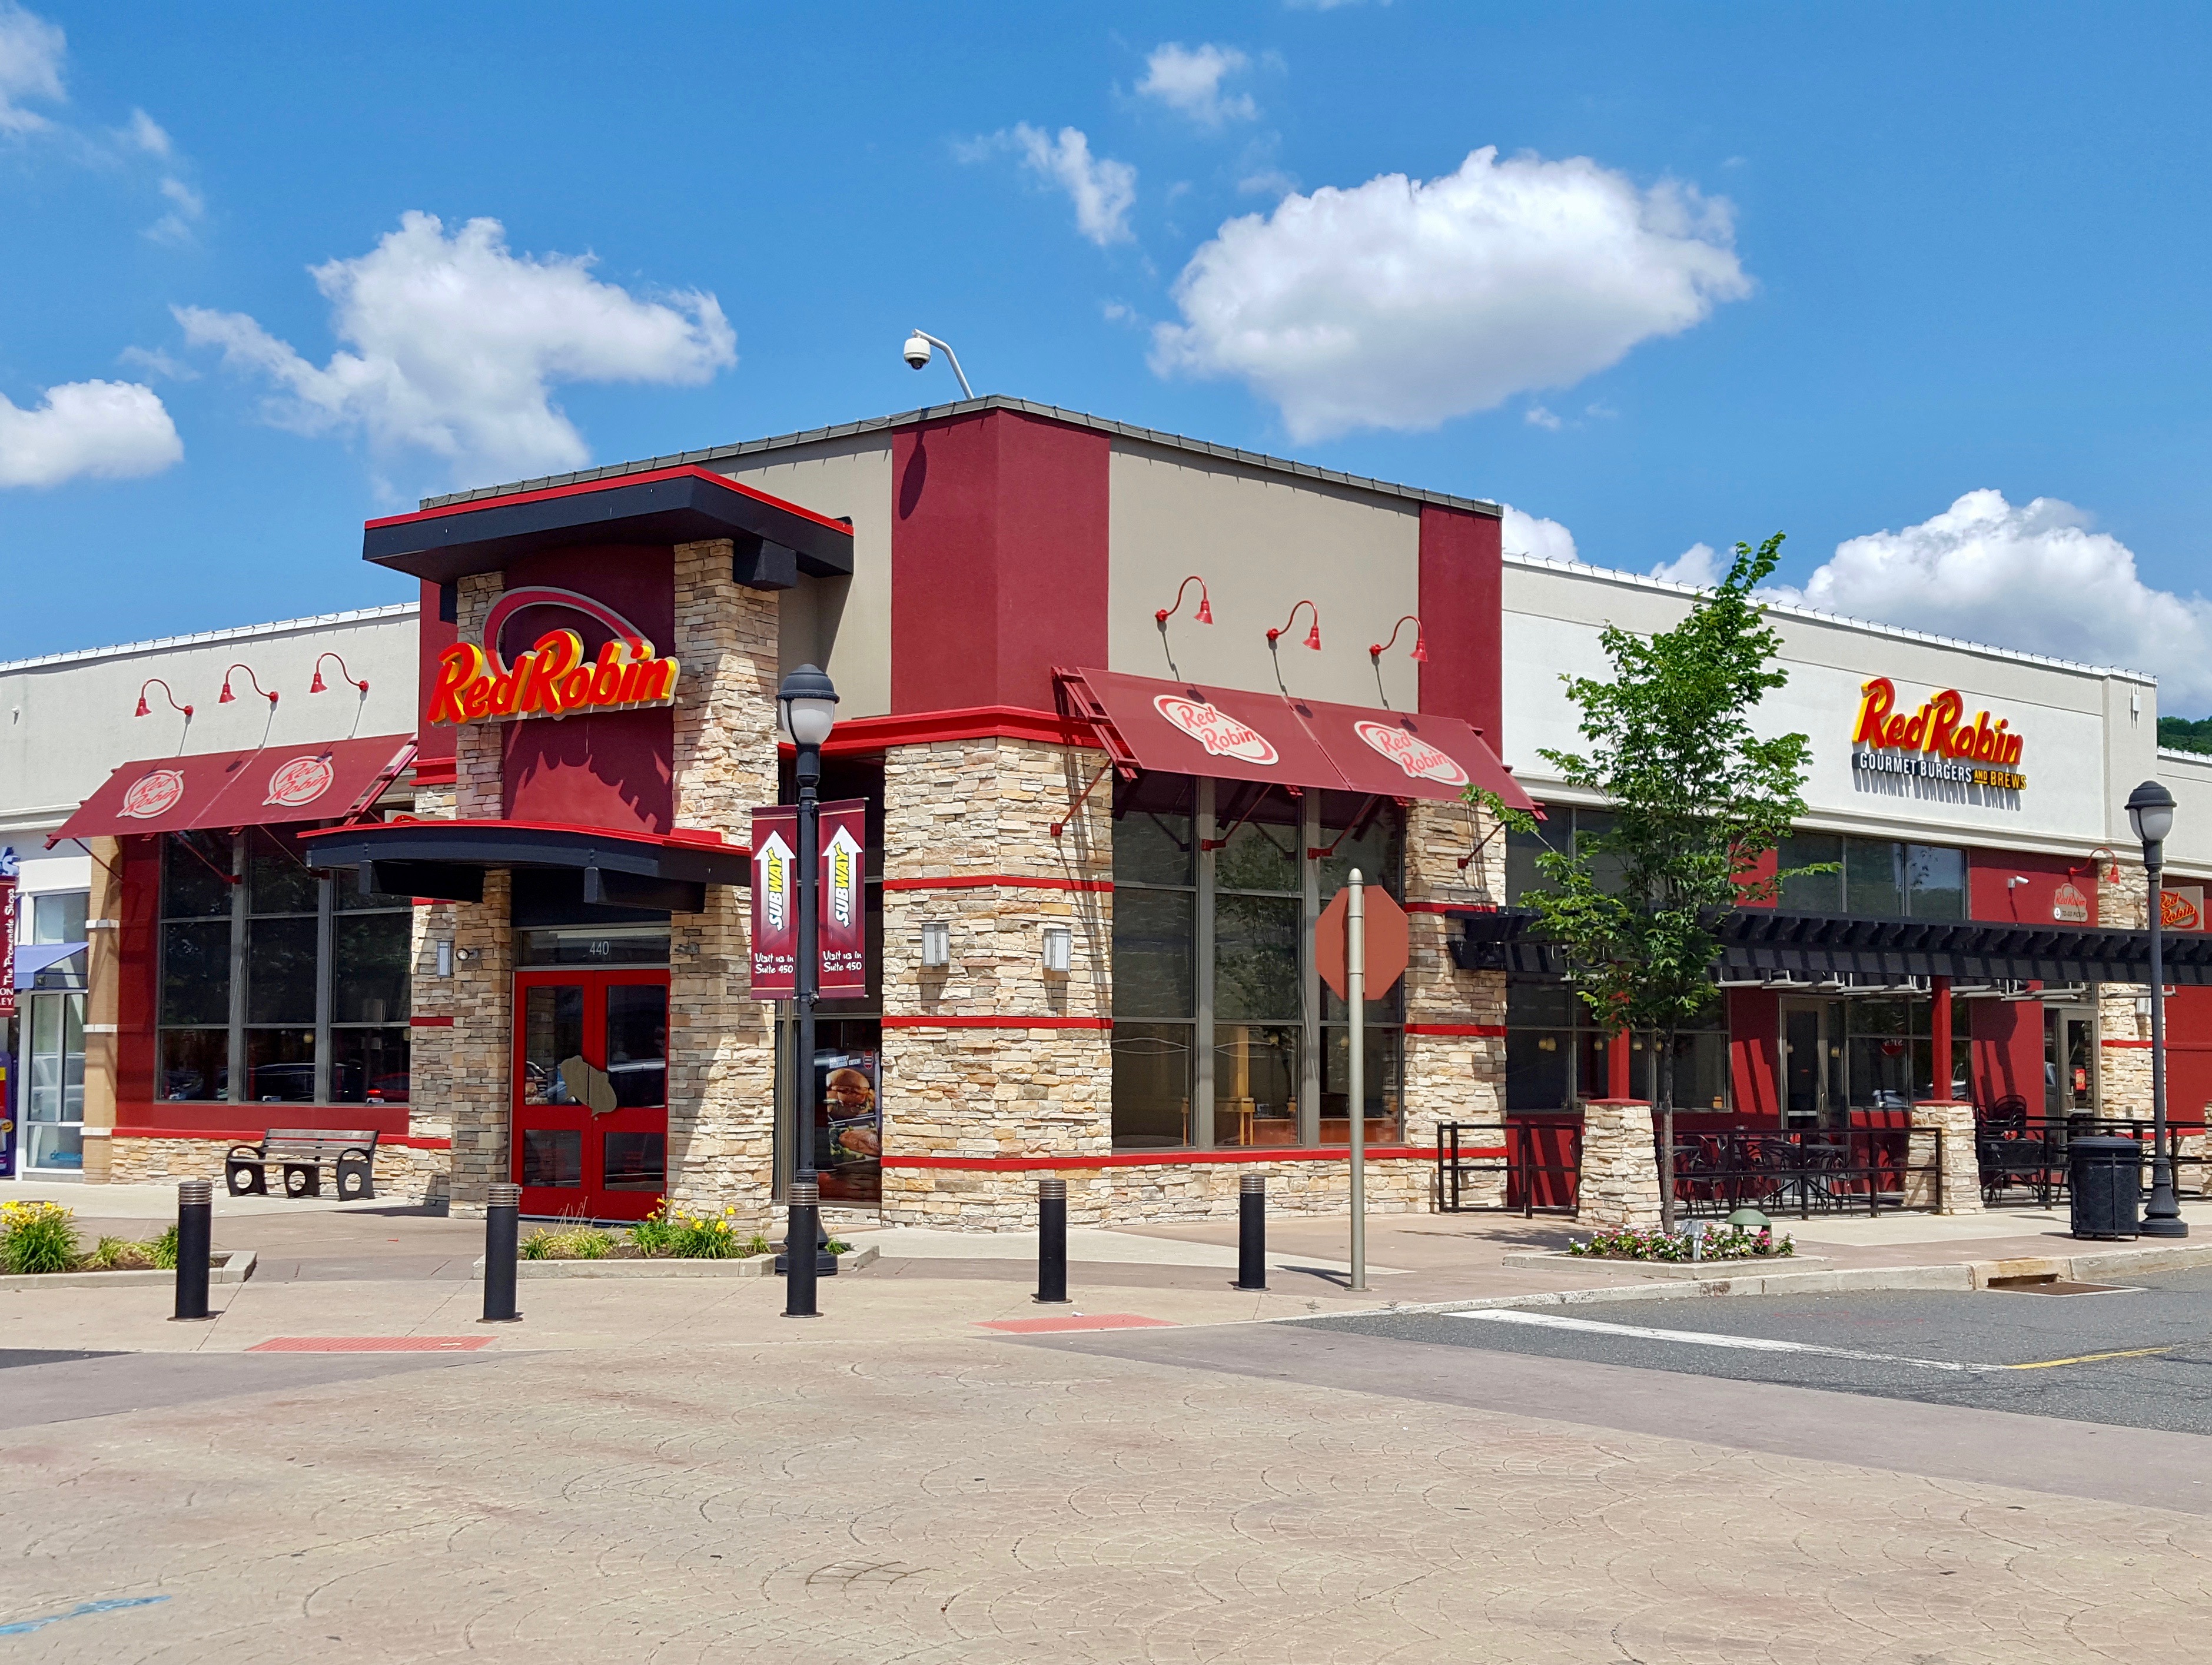 Image of the Exterior of the Saucon Valley Red Robin location